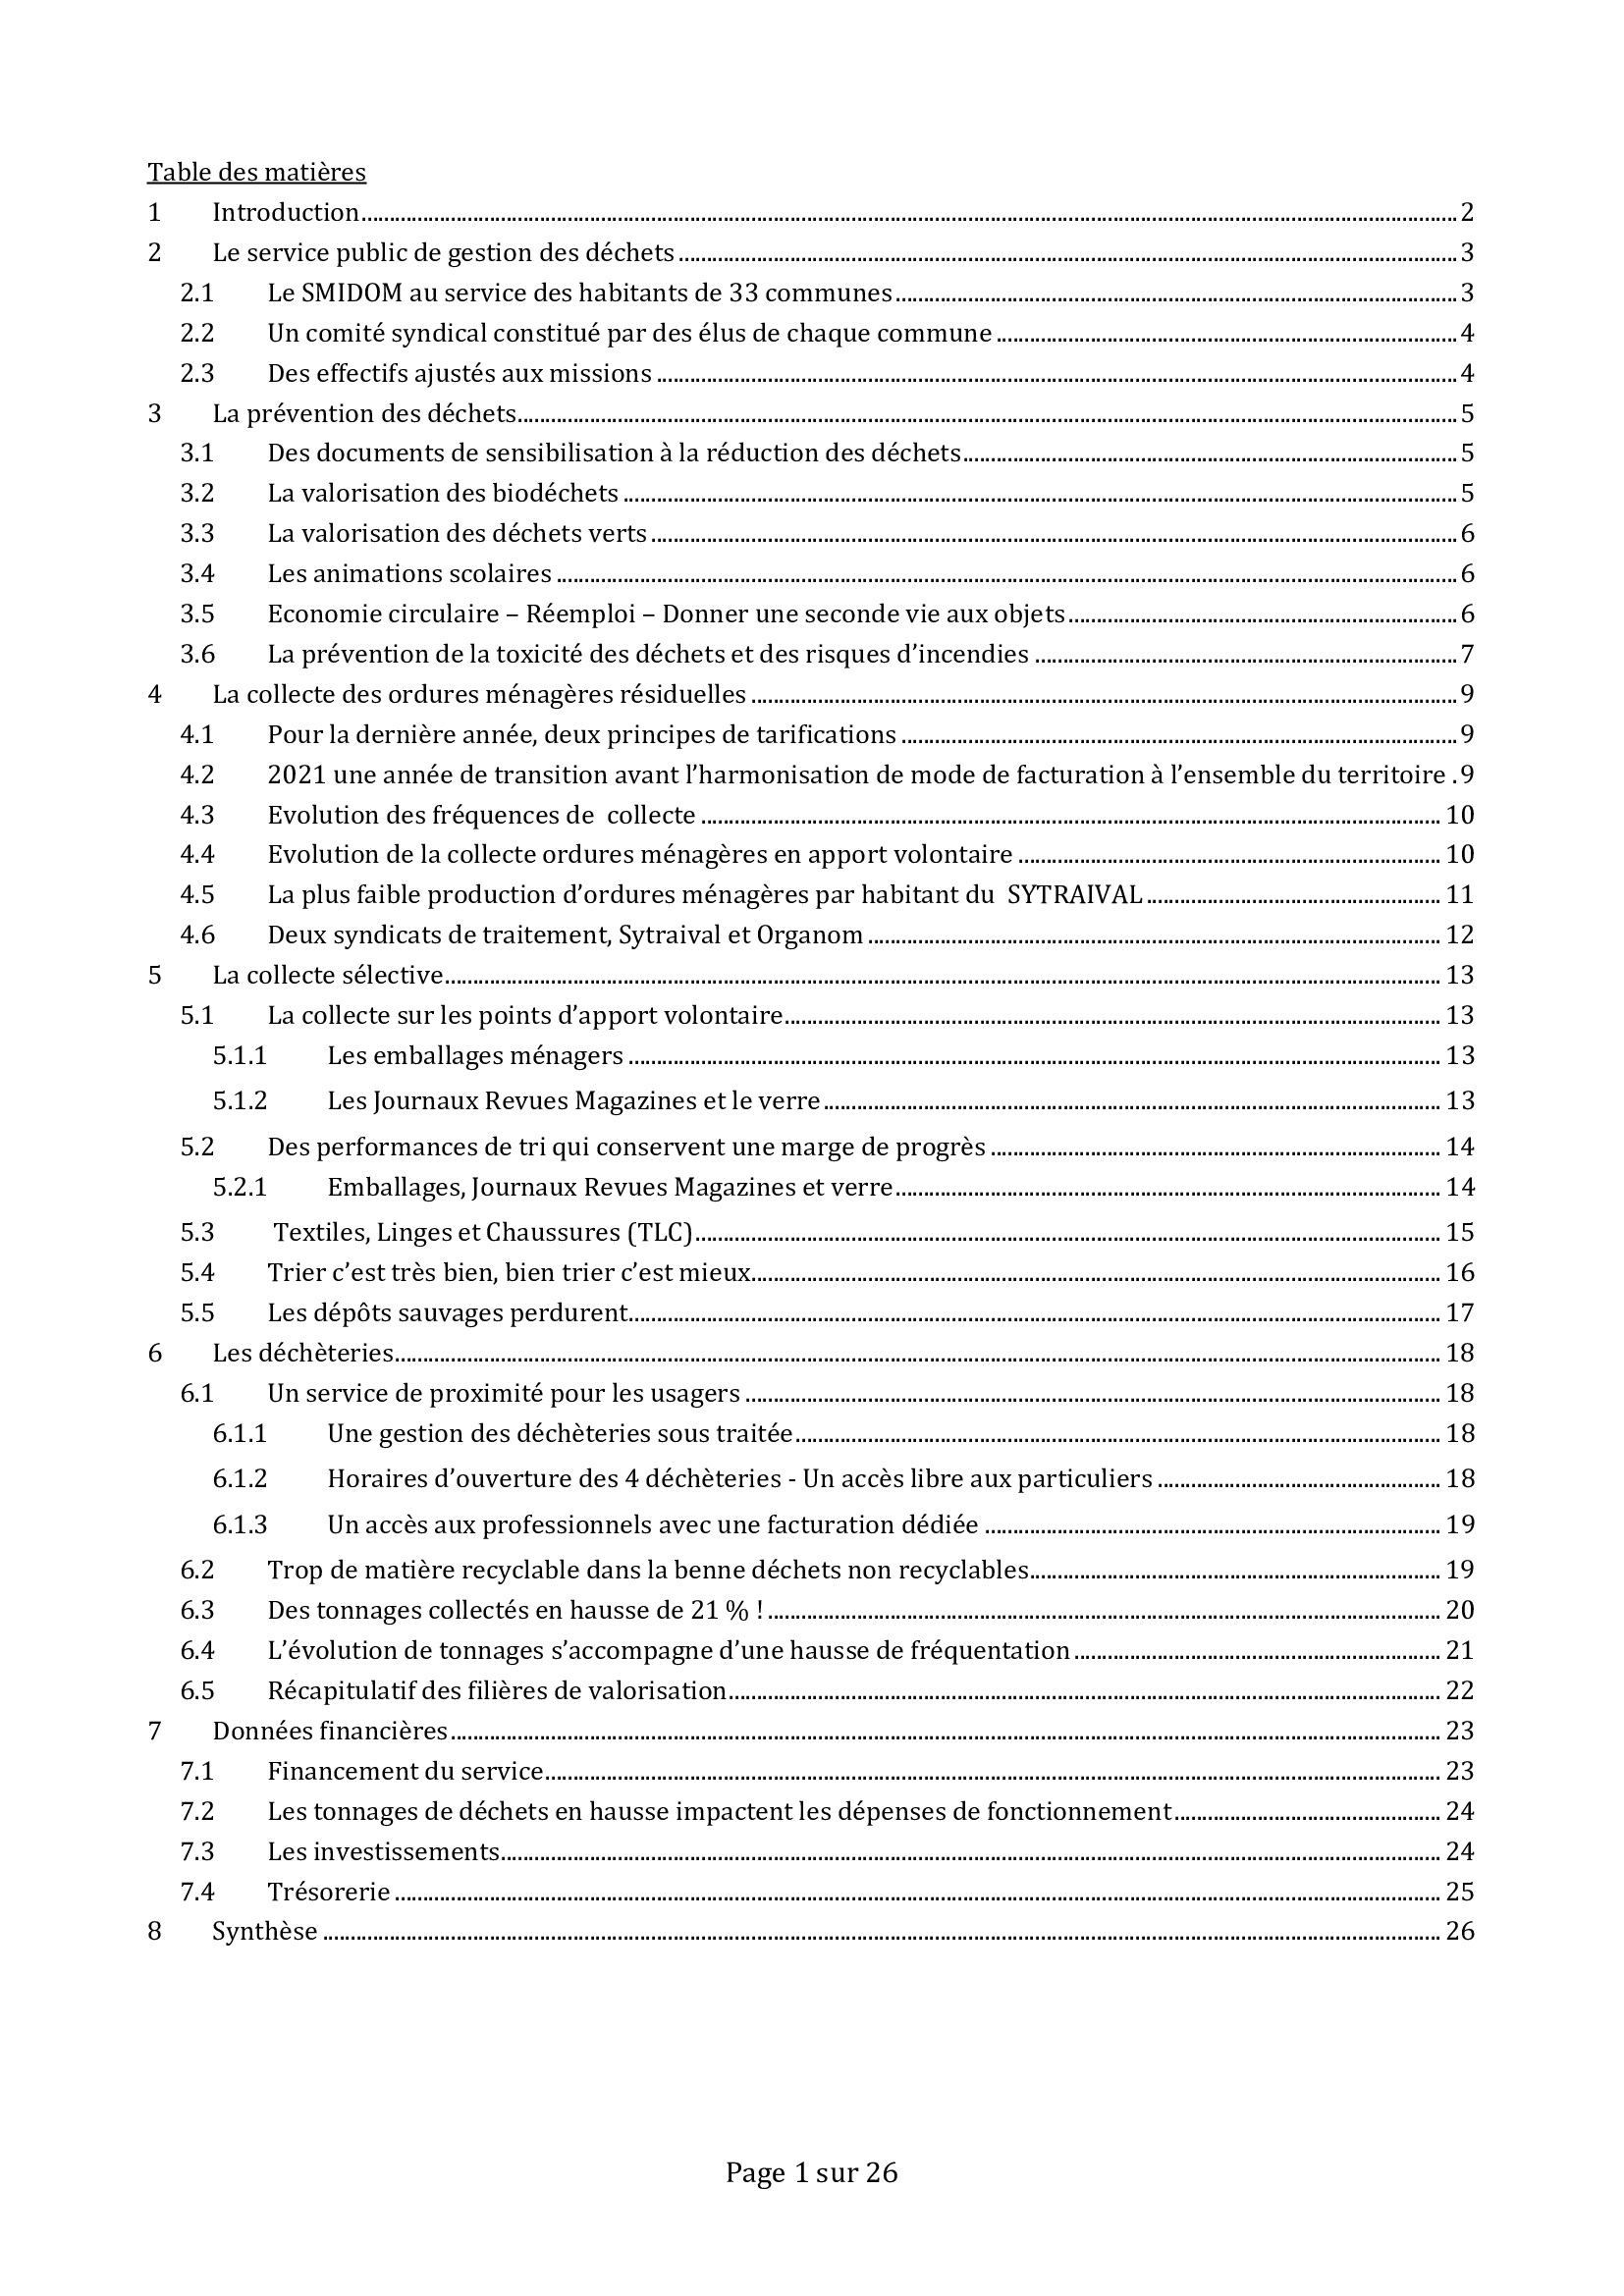 2021 - Rapport annuel - page 1.jpg